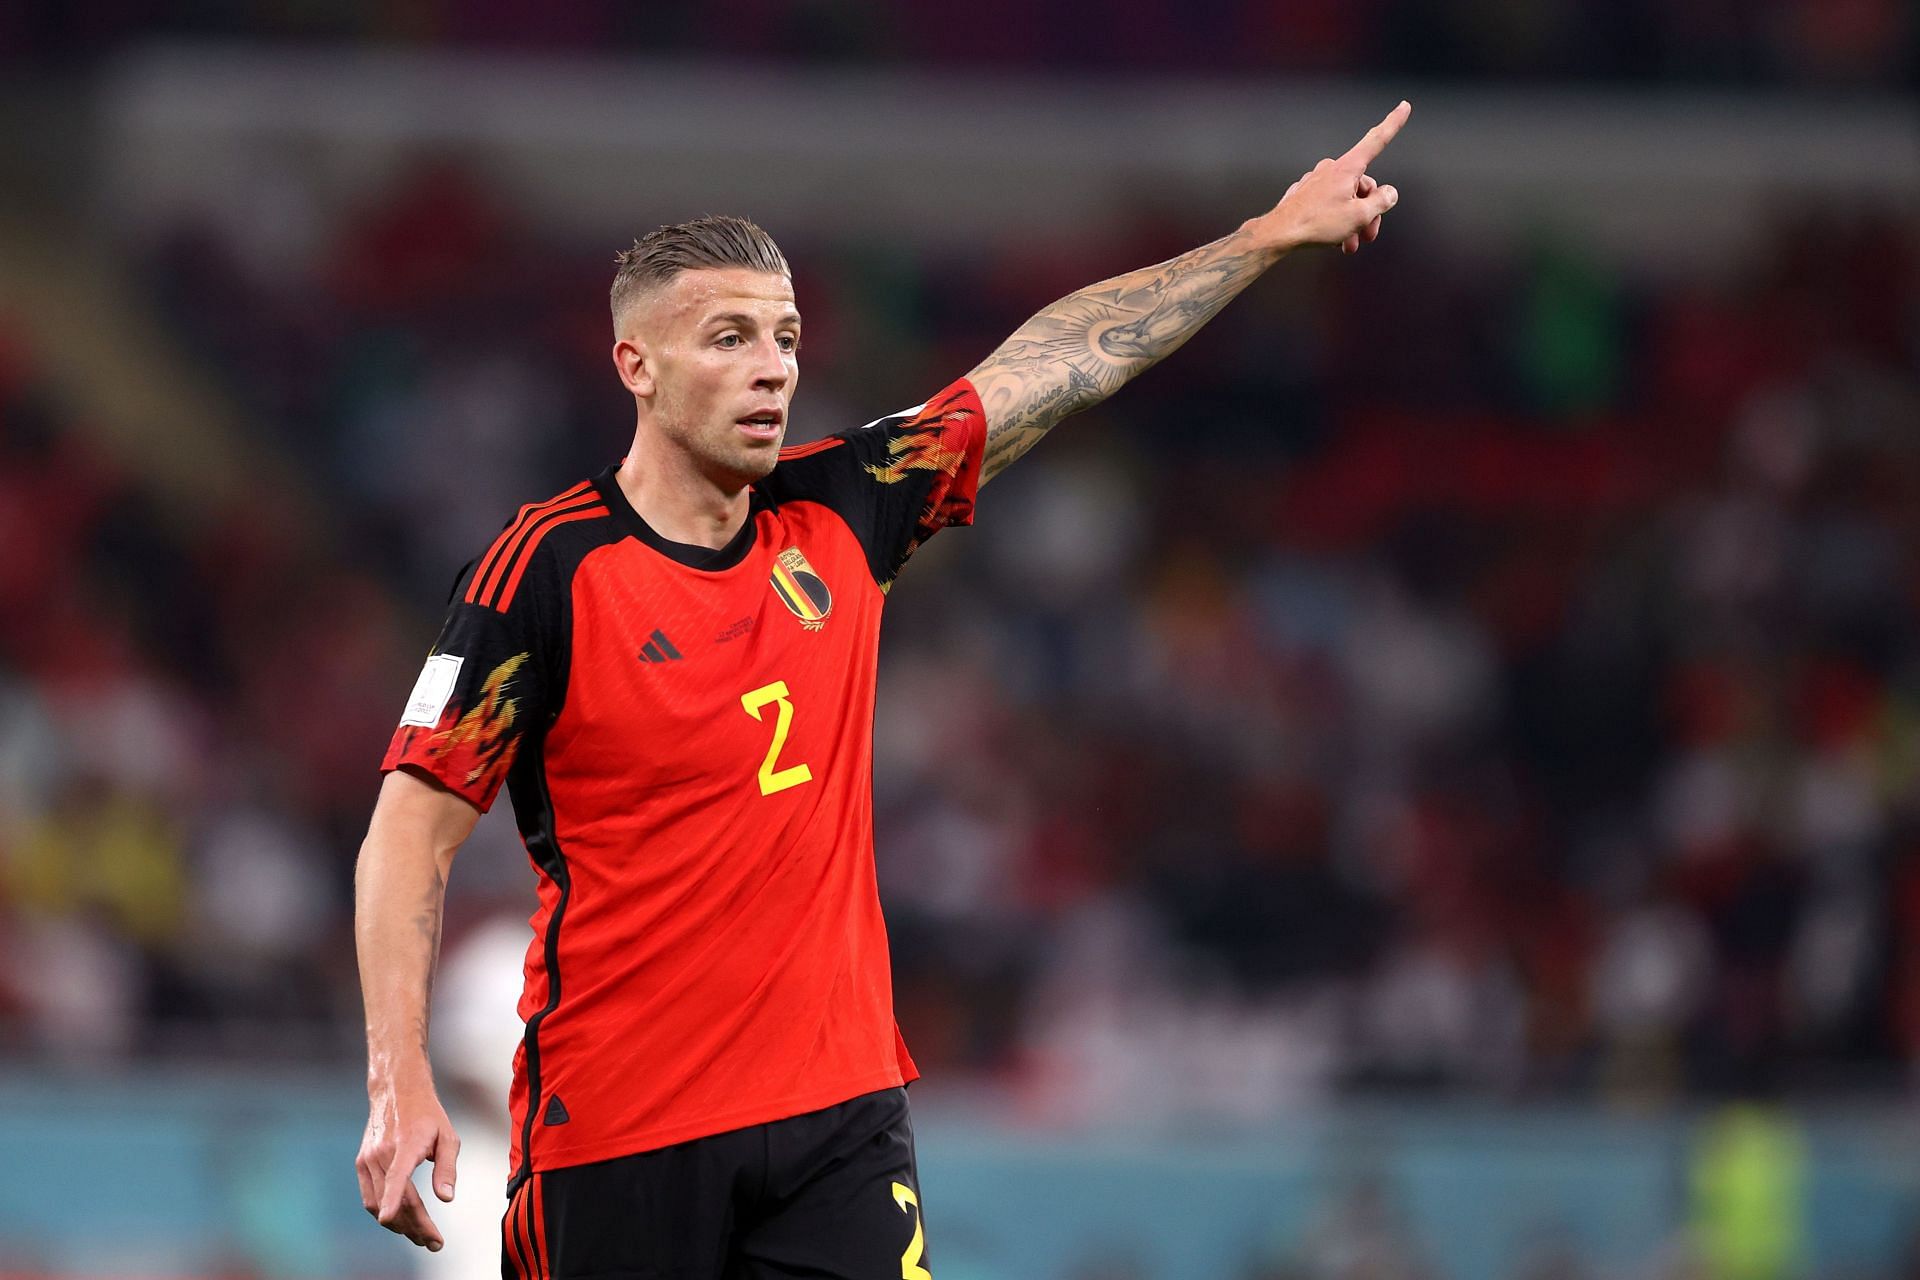 Toby Alderweireld was extremely impressive in defence for Belgium